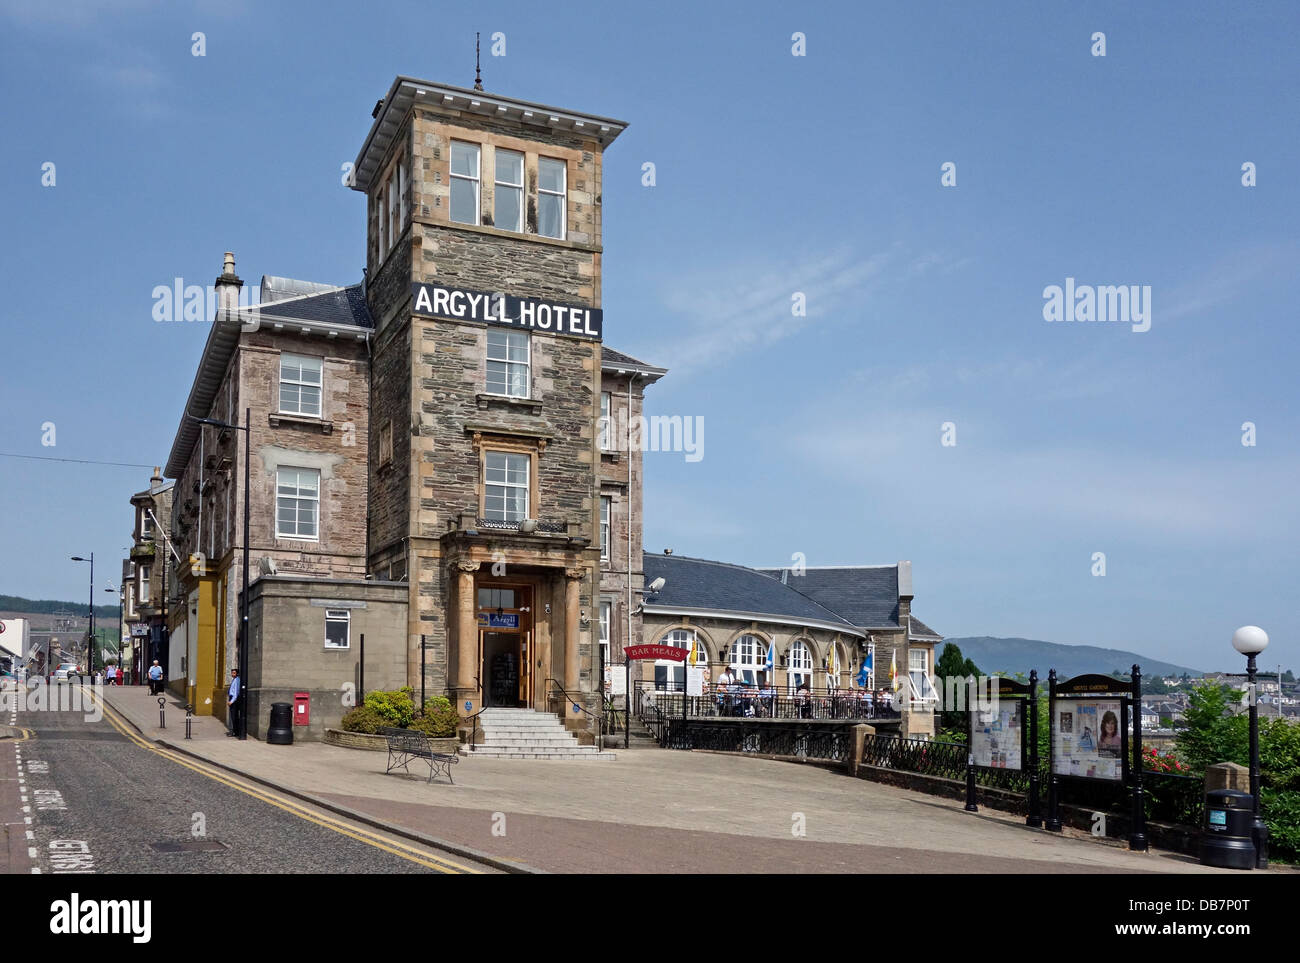 Argyll Hotel in Dunoon Argyll and Bute Scotland Stock Photo